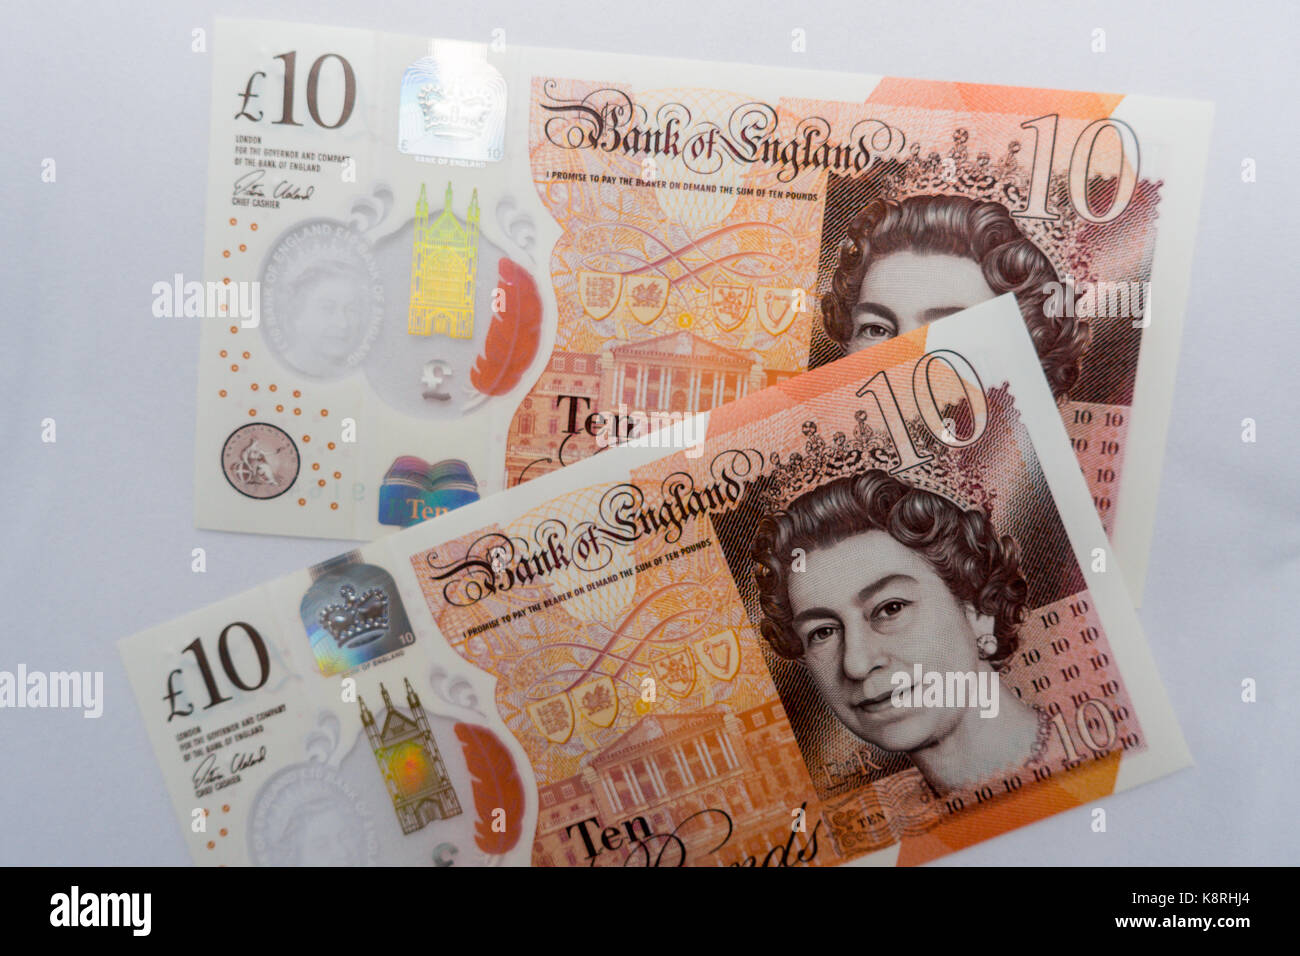 The new 10 pound note a modern Polymer banknote which will decrease environmental impact and cost less to replace, introduced september 14th 2017 Stock Photo